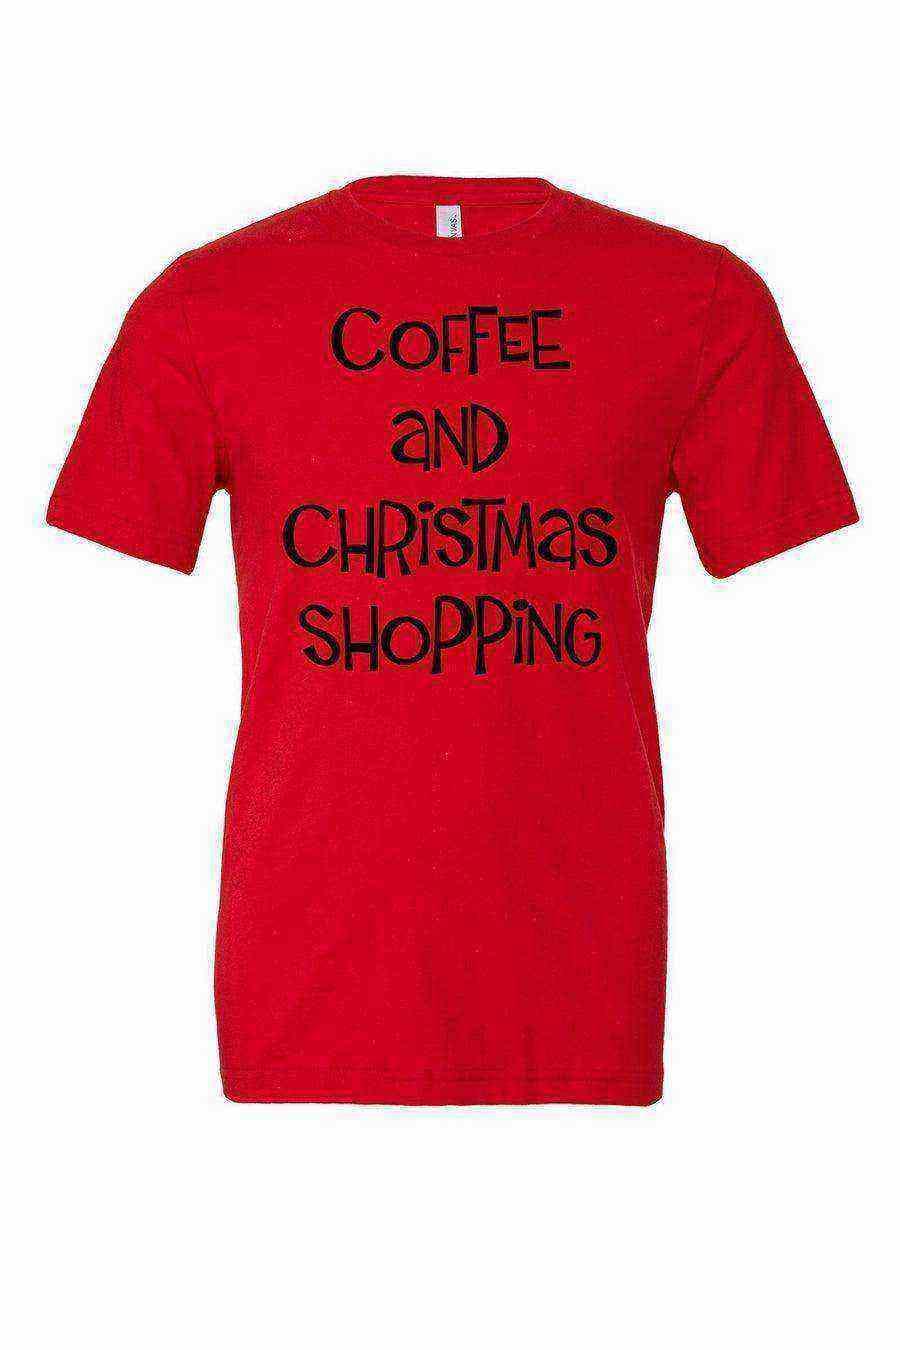 Youth | Coffee and Christmas Shopping Tee - Dylan's Tees